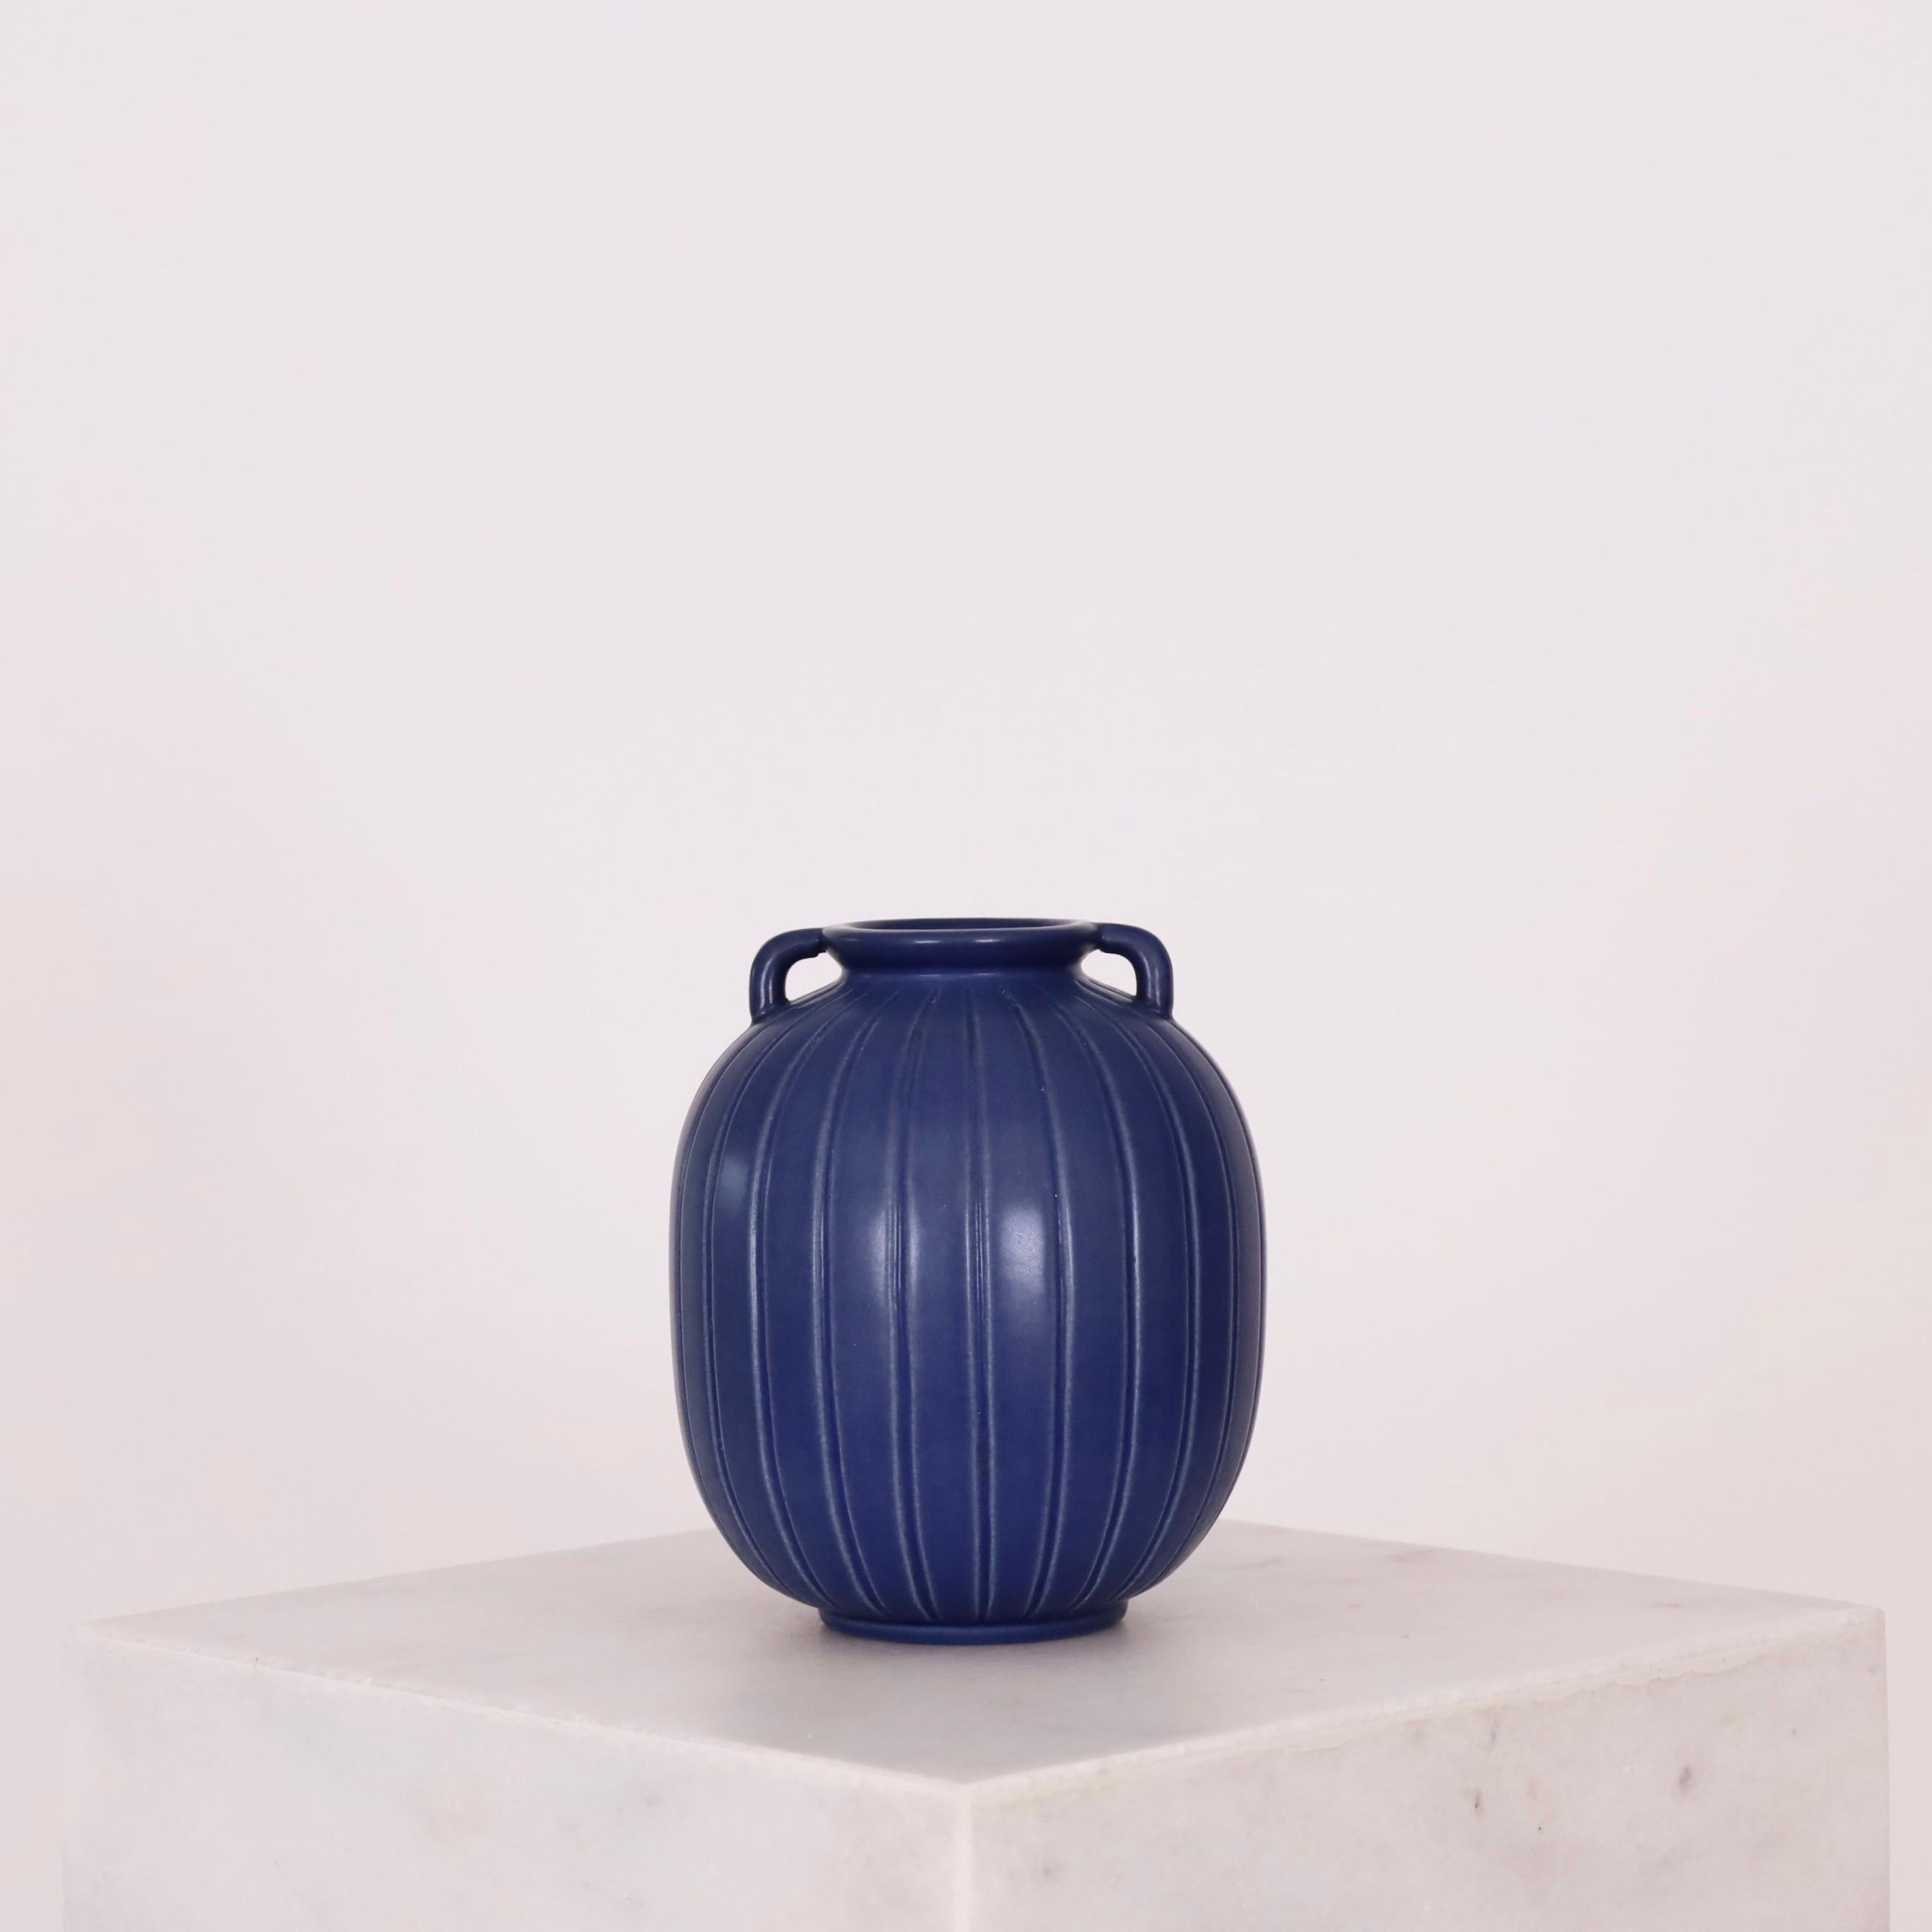 A blue stoneware vase with vertical lines designed by Axel Sørensen for P. Ipsens Enke in 1941. Simple, yet exquisite.  

* A blue stoneware vase with vertical lines and small handles.
* Designer: Axel Sorensen
* Style: 14
* Producer: P. Ipsens